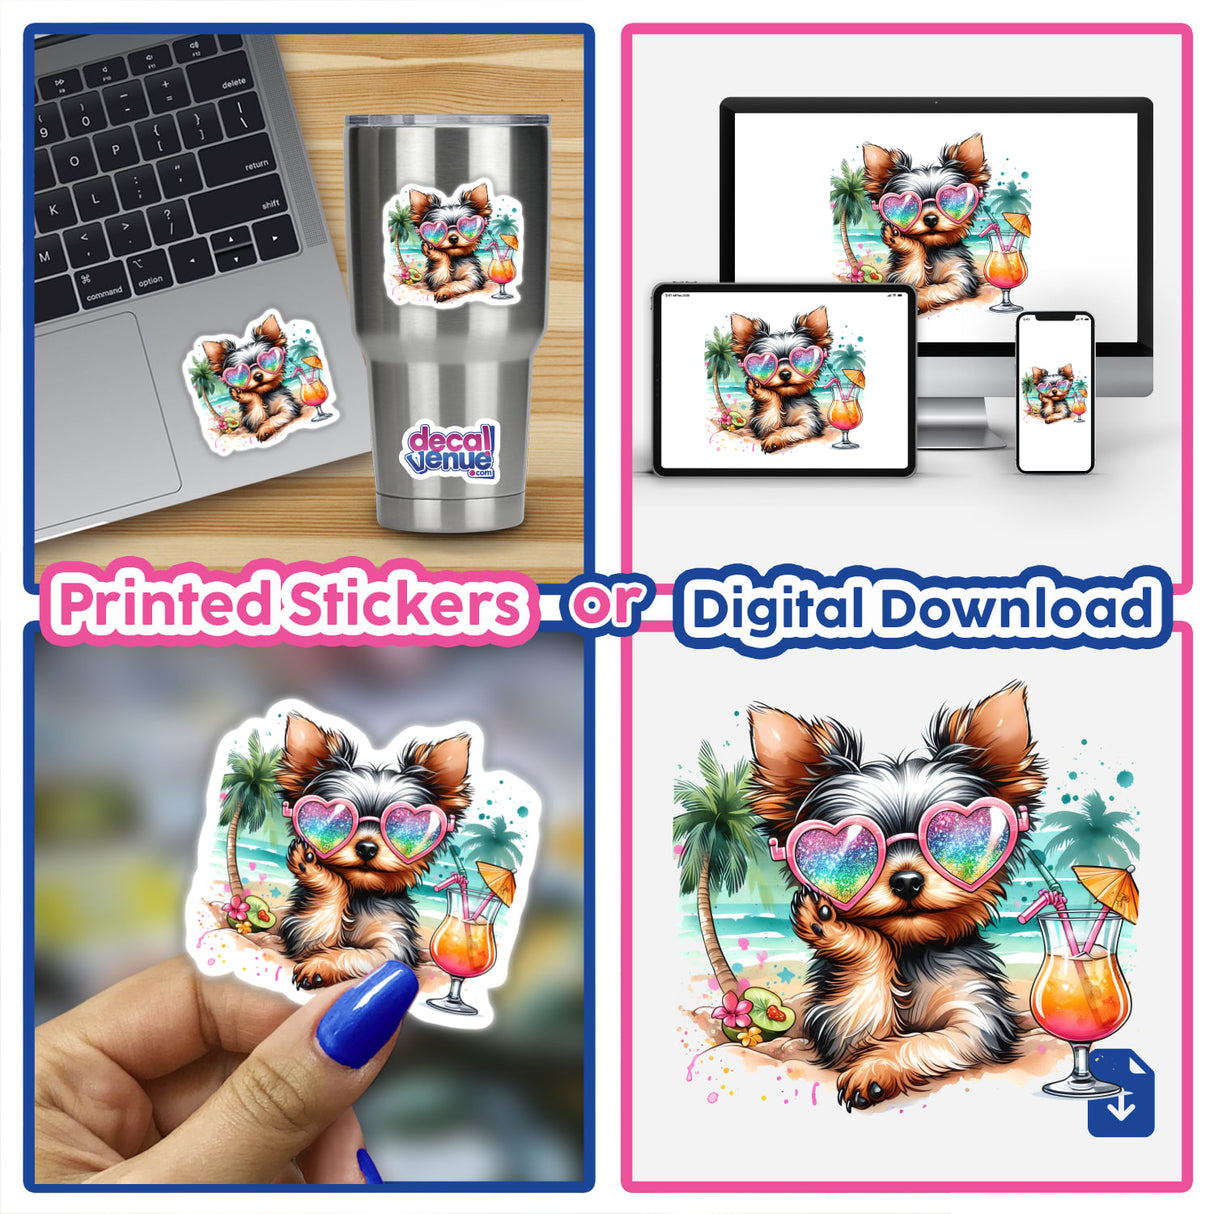 Cute Yorkshire Terrier dog with sunglasses on a tropical beach, displayed on various products including a laptop, mobile devices, and a sticker. The product images showcase the digital artwork design featuring the playful, stylized Yorkie character.